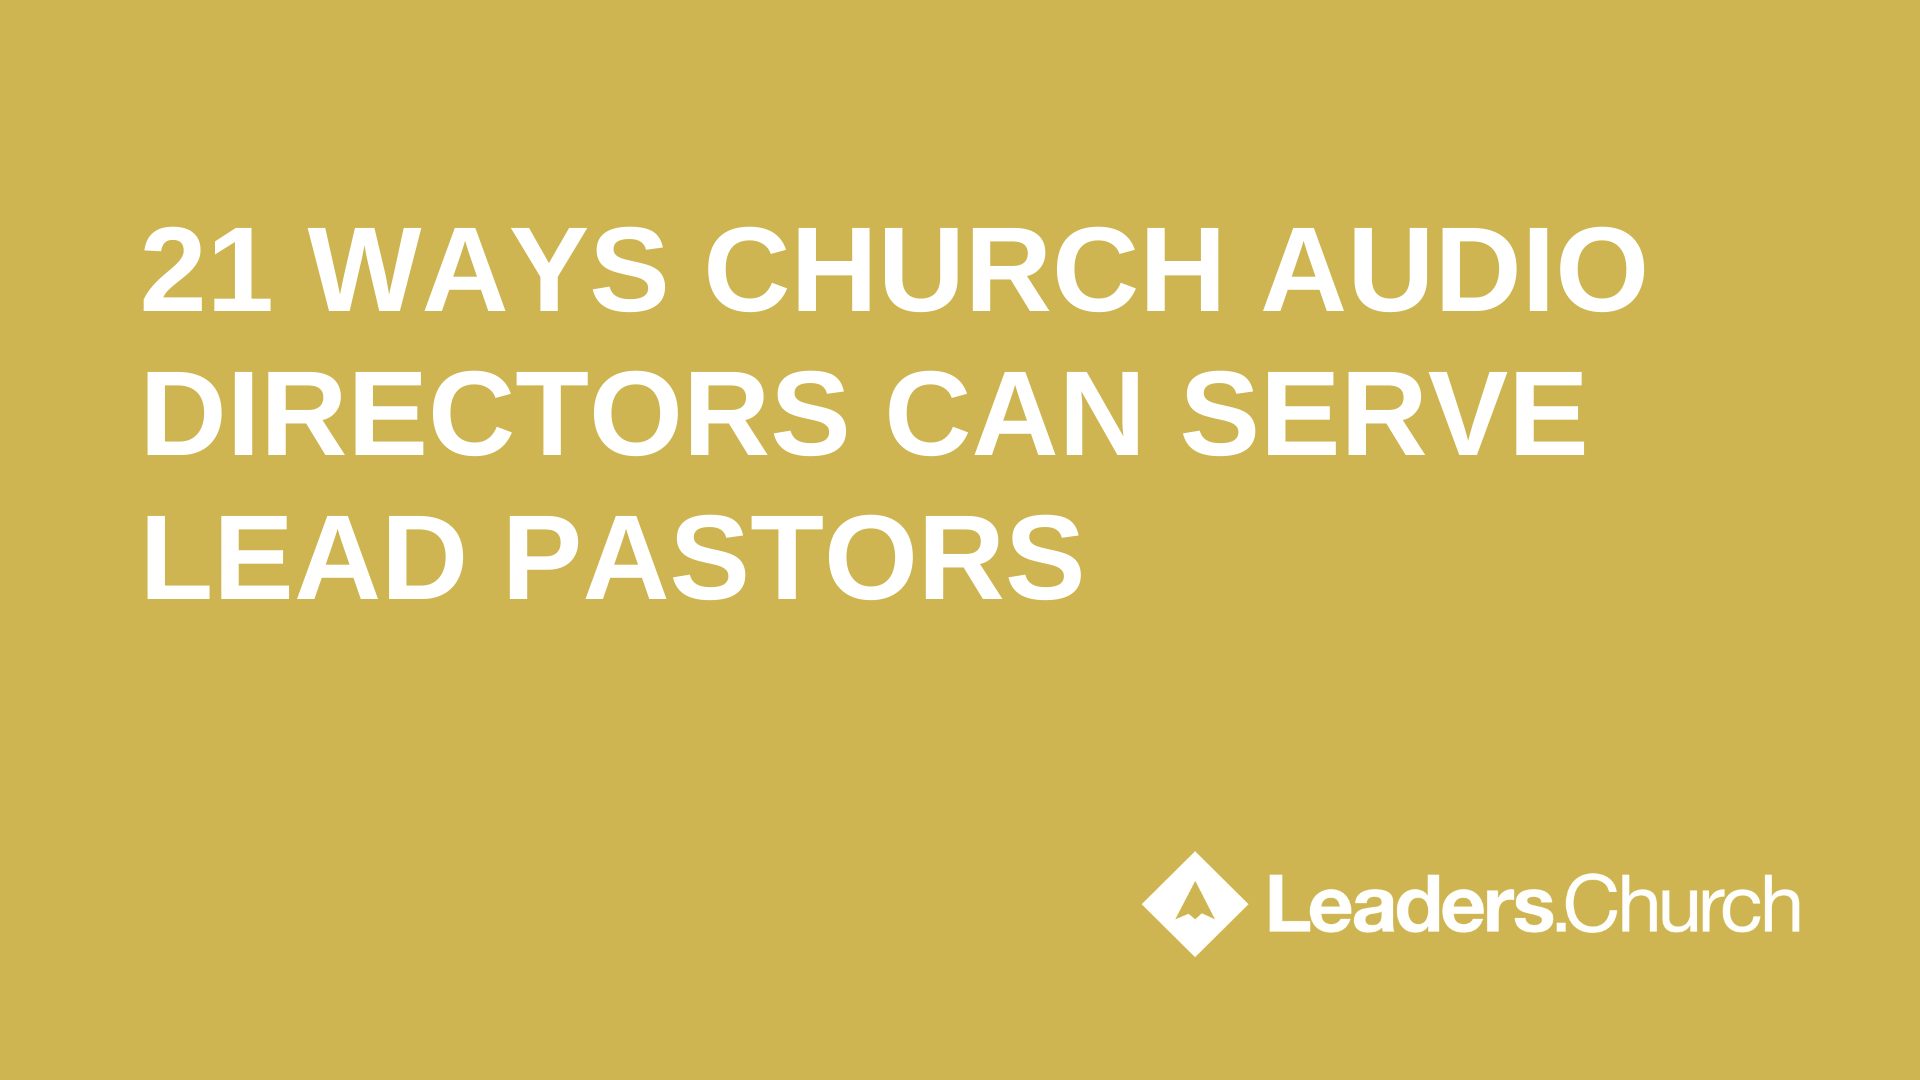 text "21 WAYS CHURCH AUDIO DIRECTORS CAN SERVE LEAD PASTORS" on yellow background leaders.church